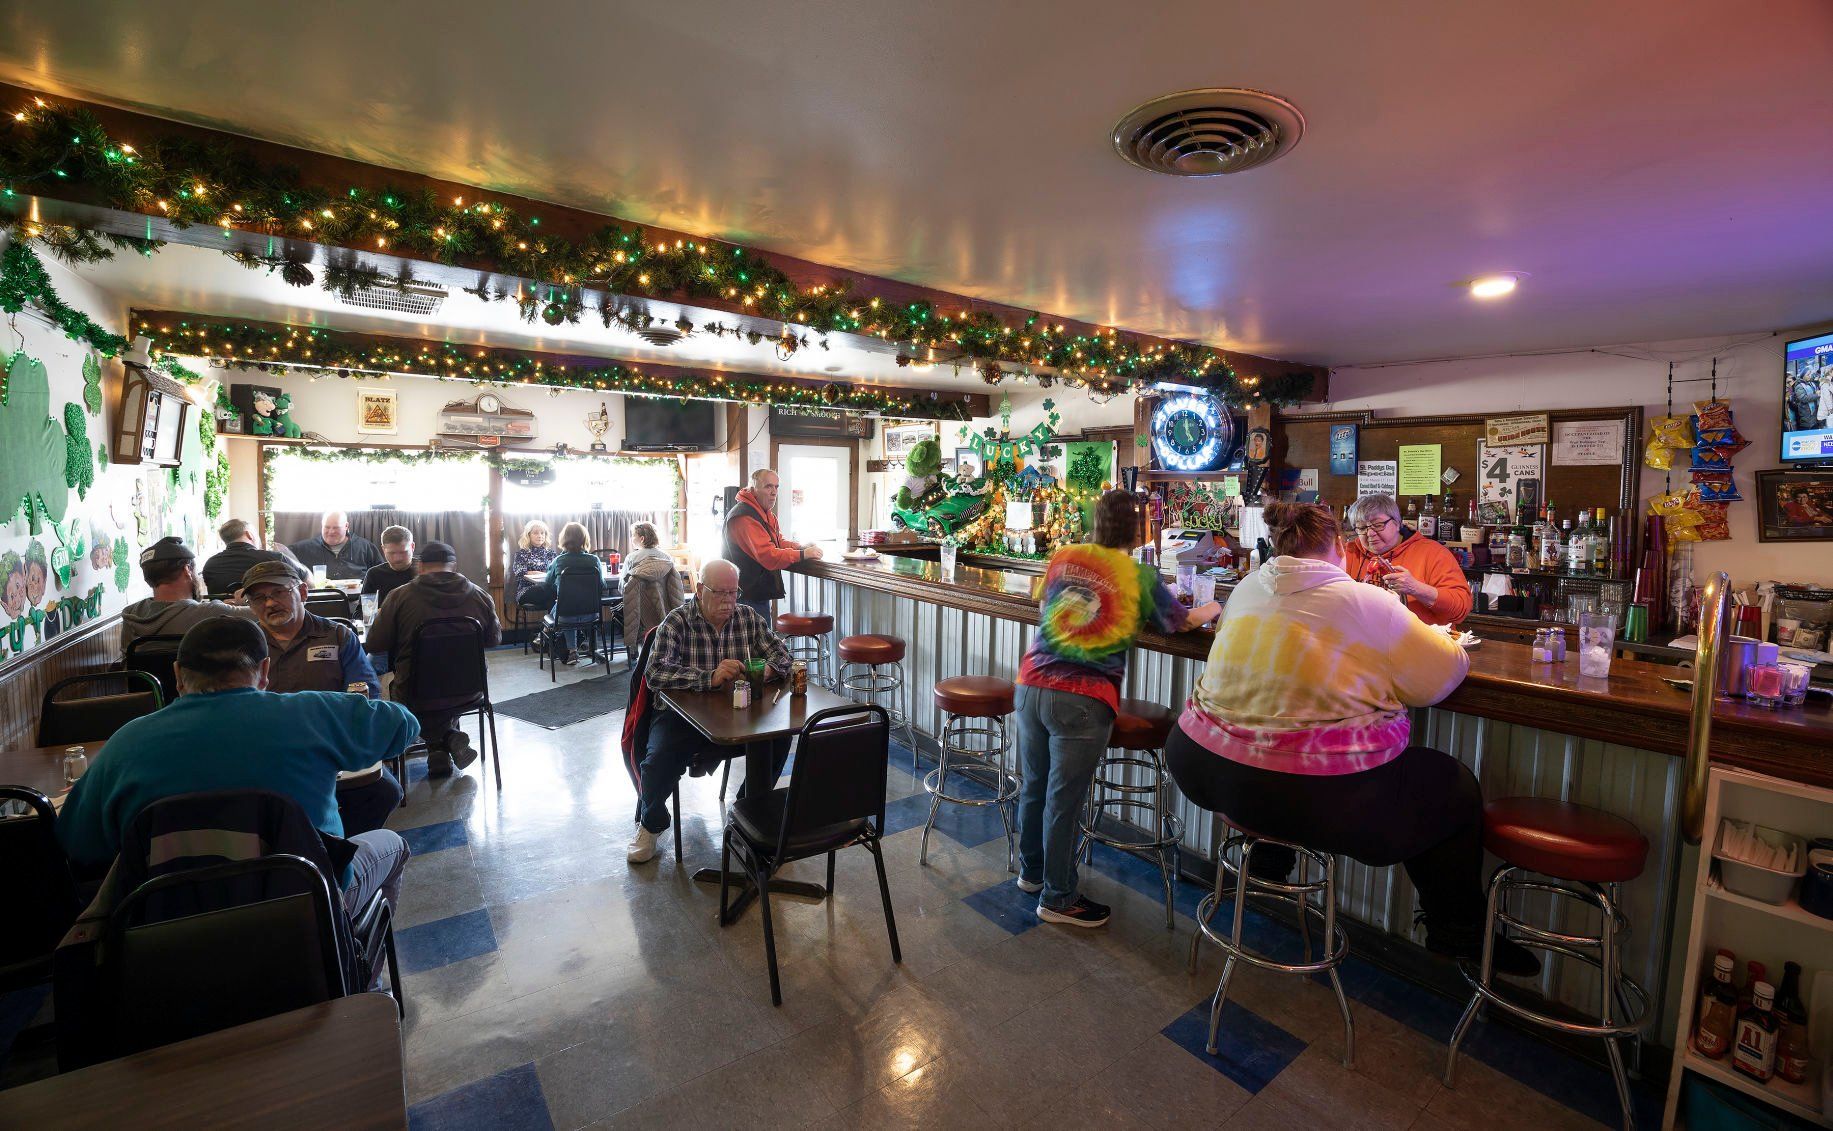 The lunch crowd arrives at West Dubuque Tap on Monday. Owner Kathy Ginter says she hasn’t seen some regulars for two years since COVID-19 hit.    PHOTO CREDIT: Stephen Gassman